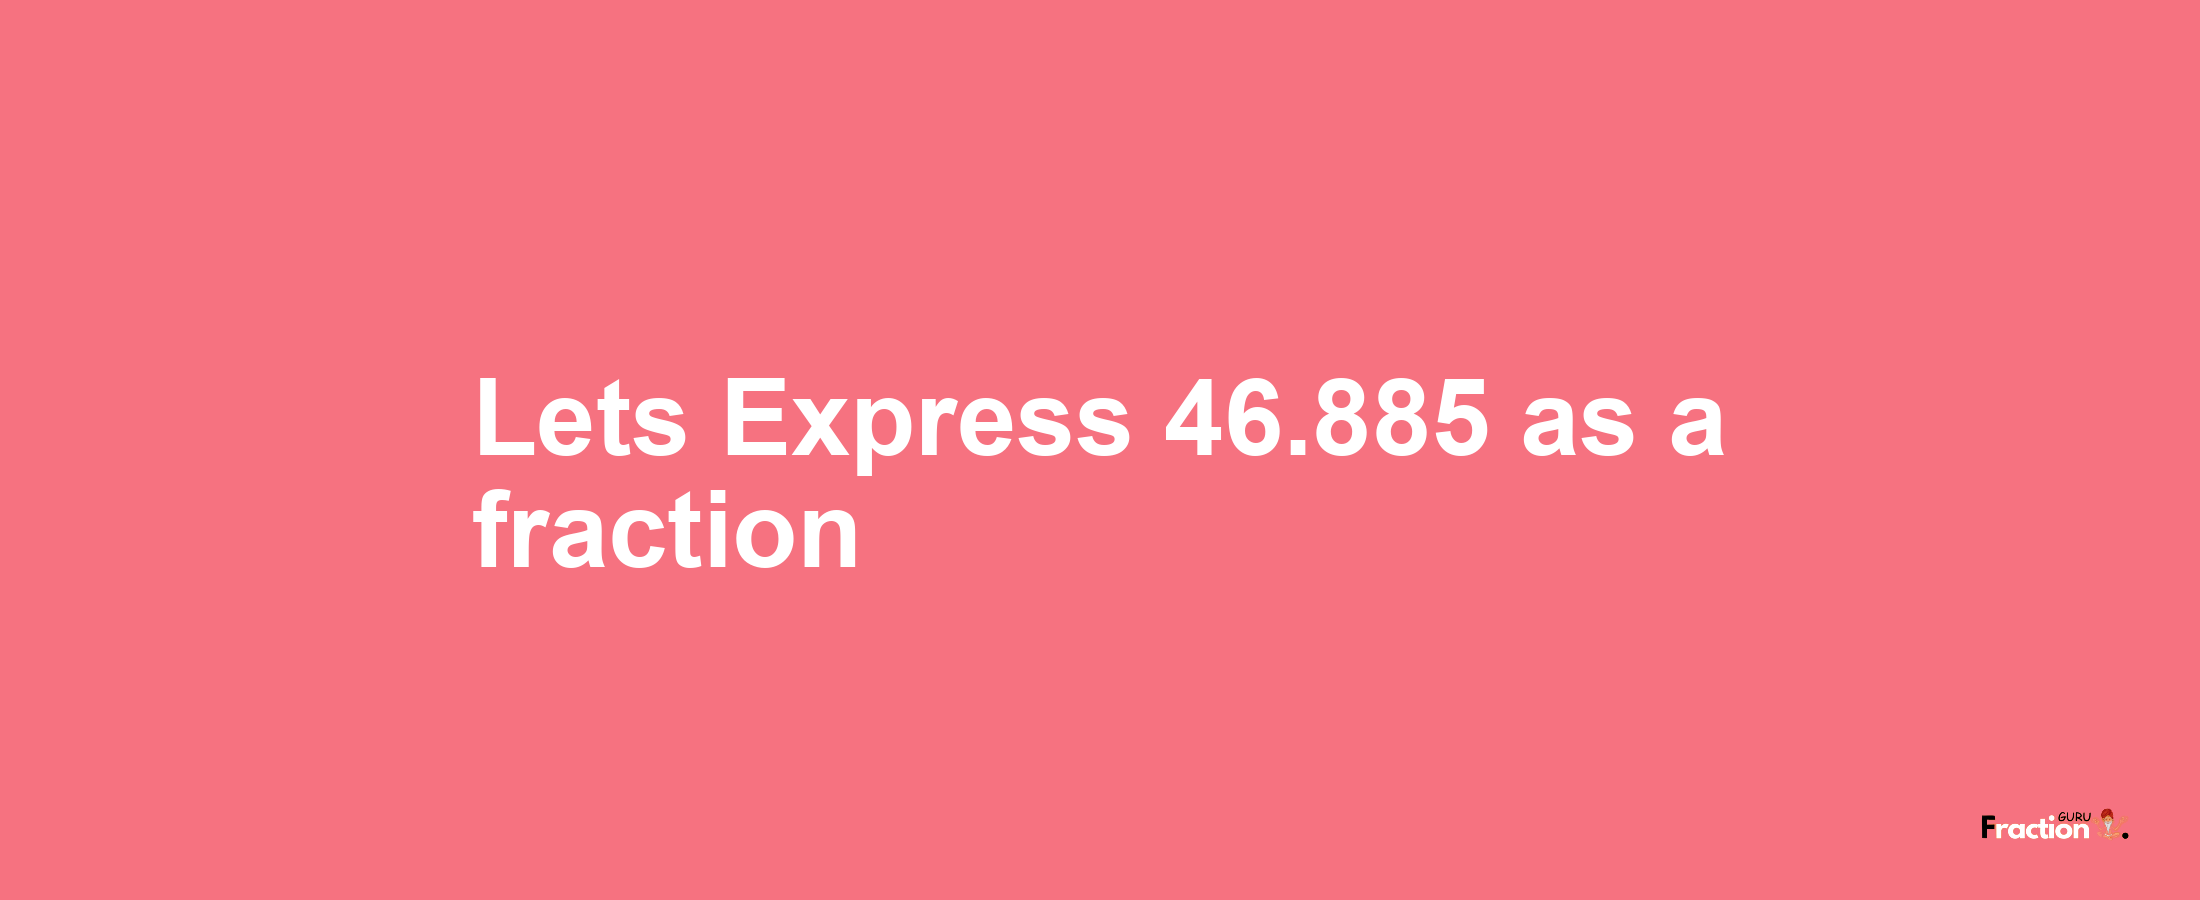 Lets Express 46.885 as afraction